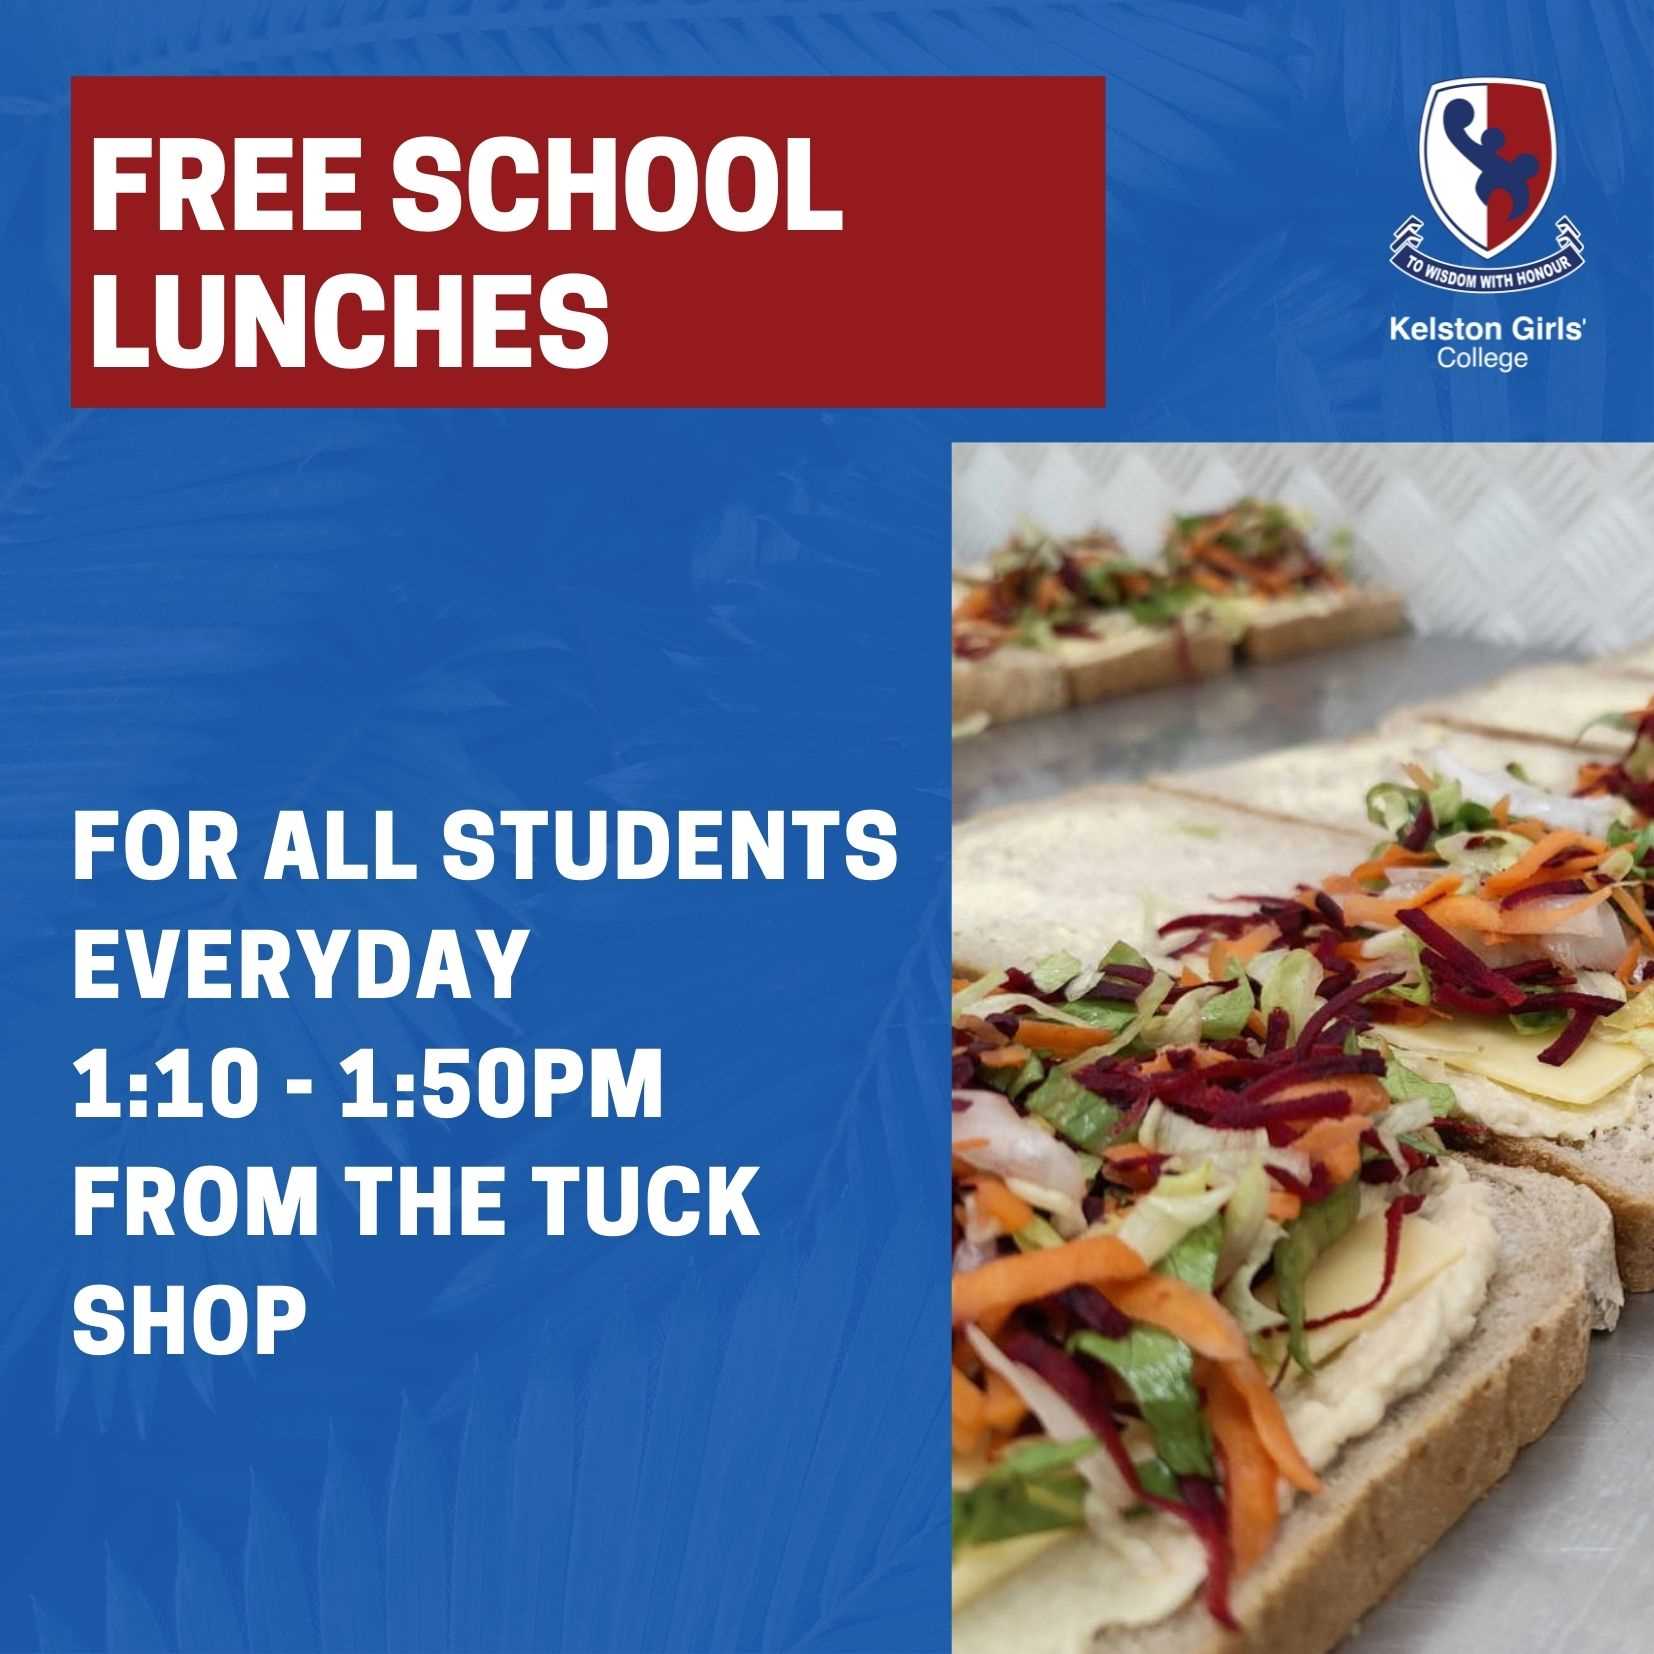 Free School Lunches